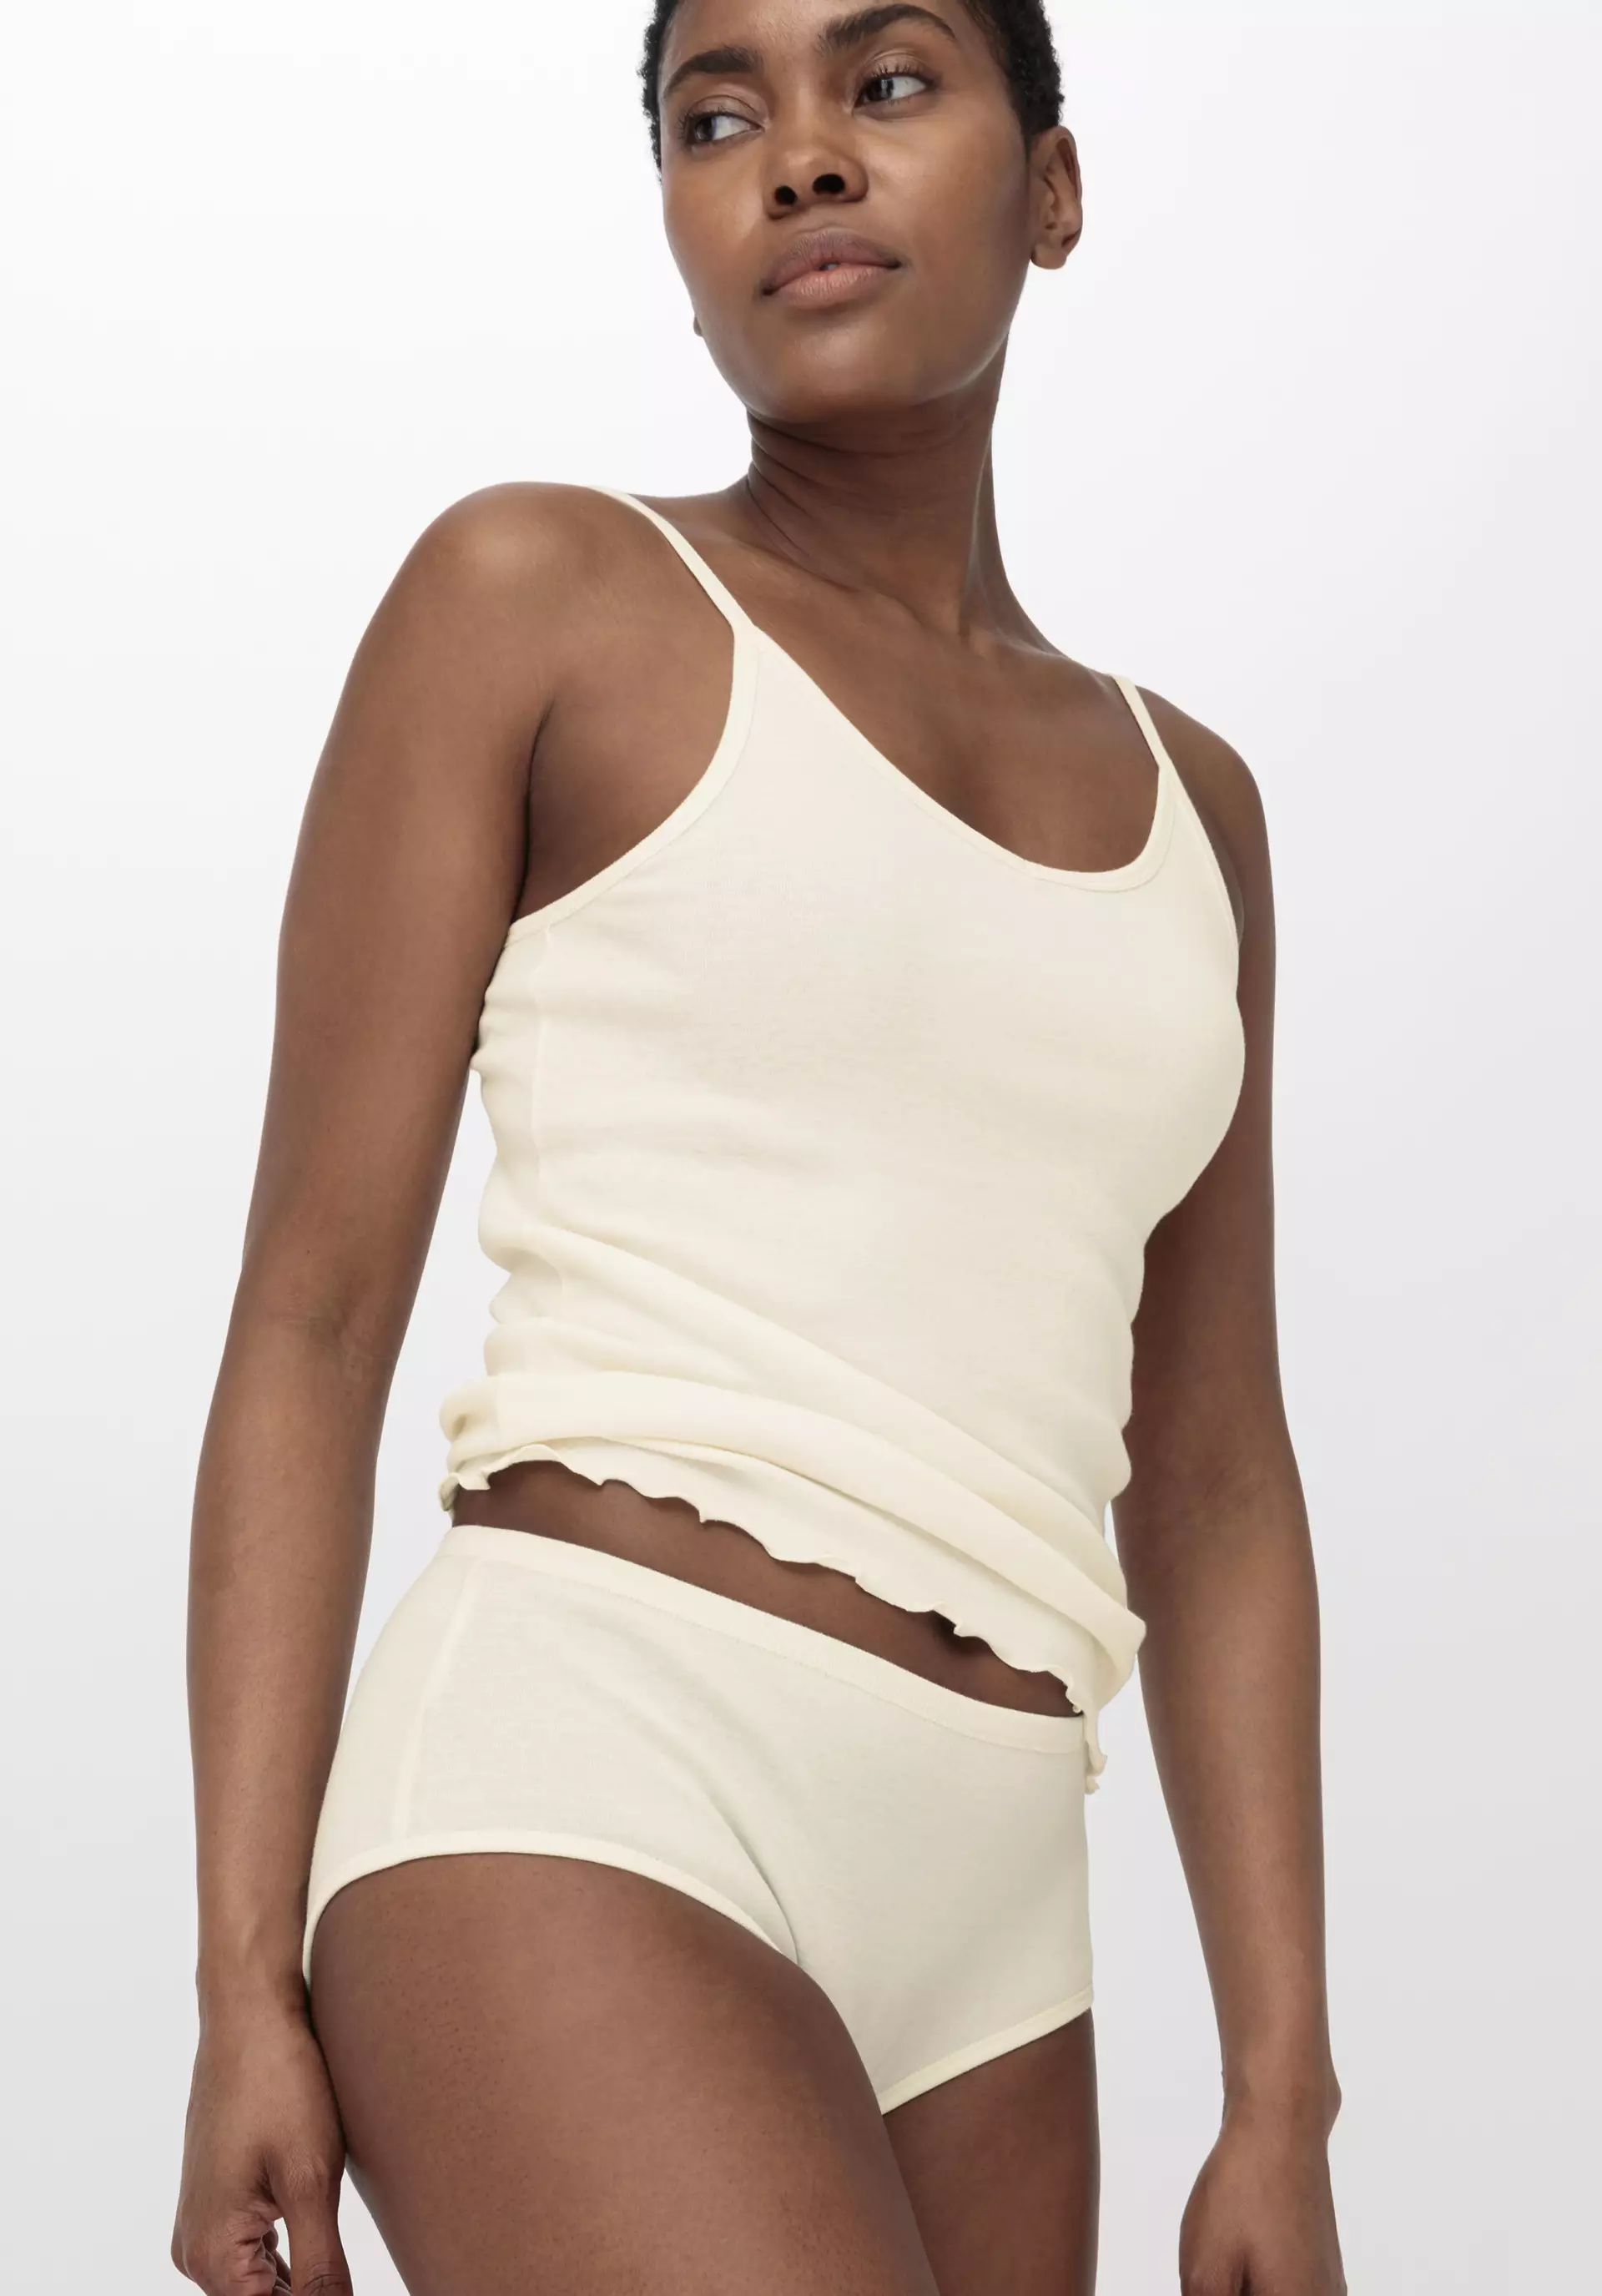 Low cut panty in a pack of 2 PURE NATURE made from pure organic cotton 54718